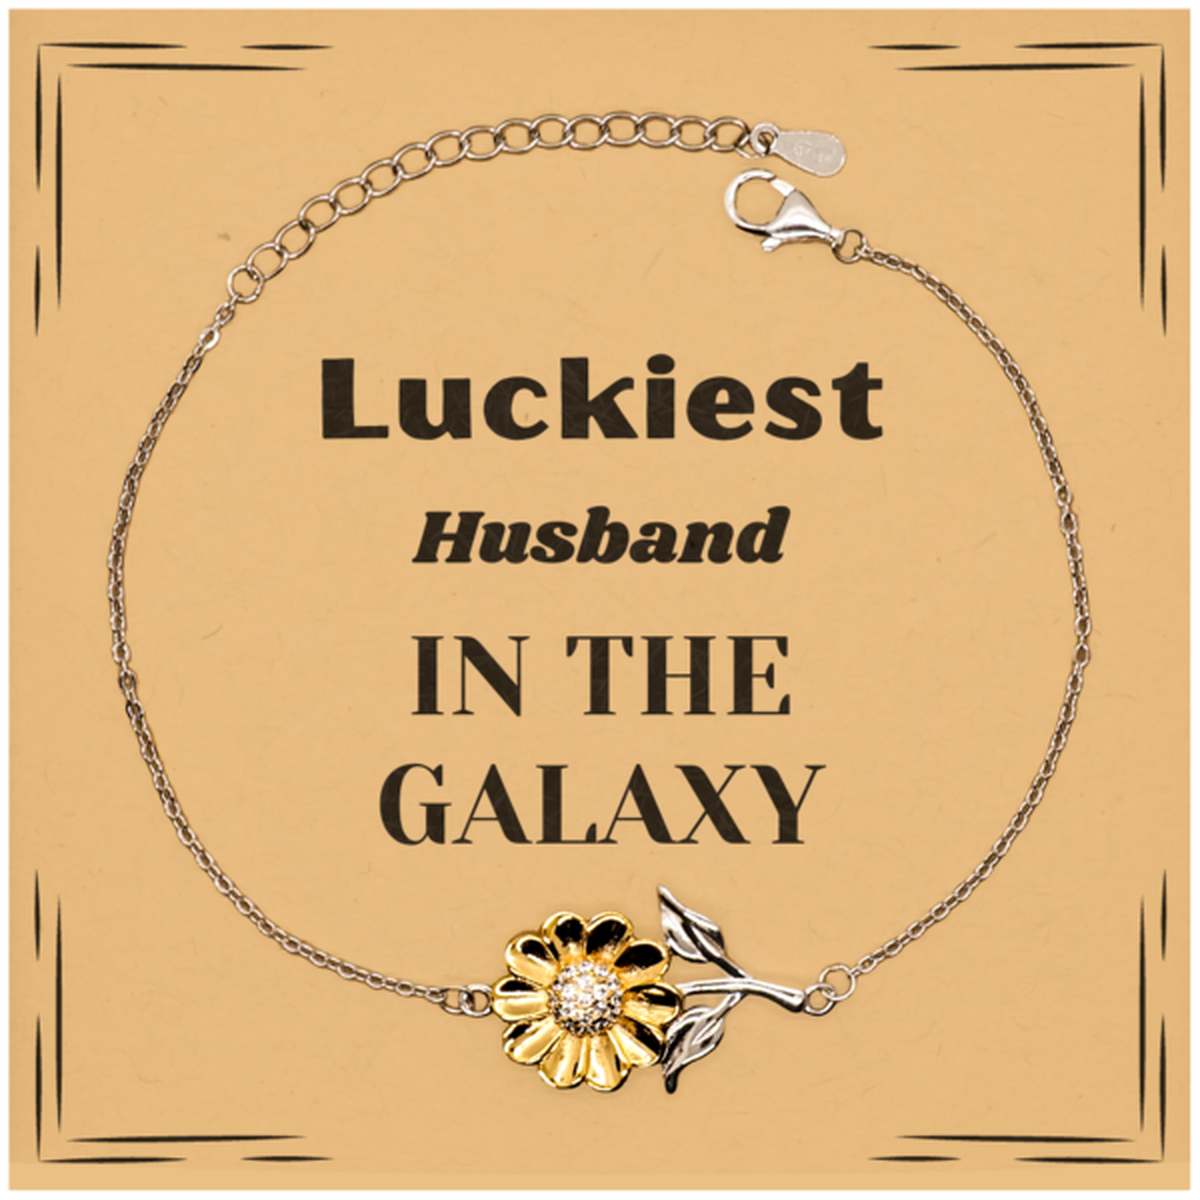 Luckiest Husband in the Galaxy, To My Husband Message Card Gifts, Christmas Husband Sunflower Bracelet Gifts, X-mas Birthday Unique Gifts For Husband Men Women